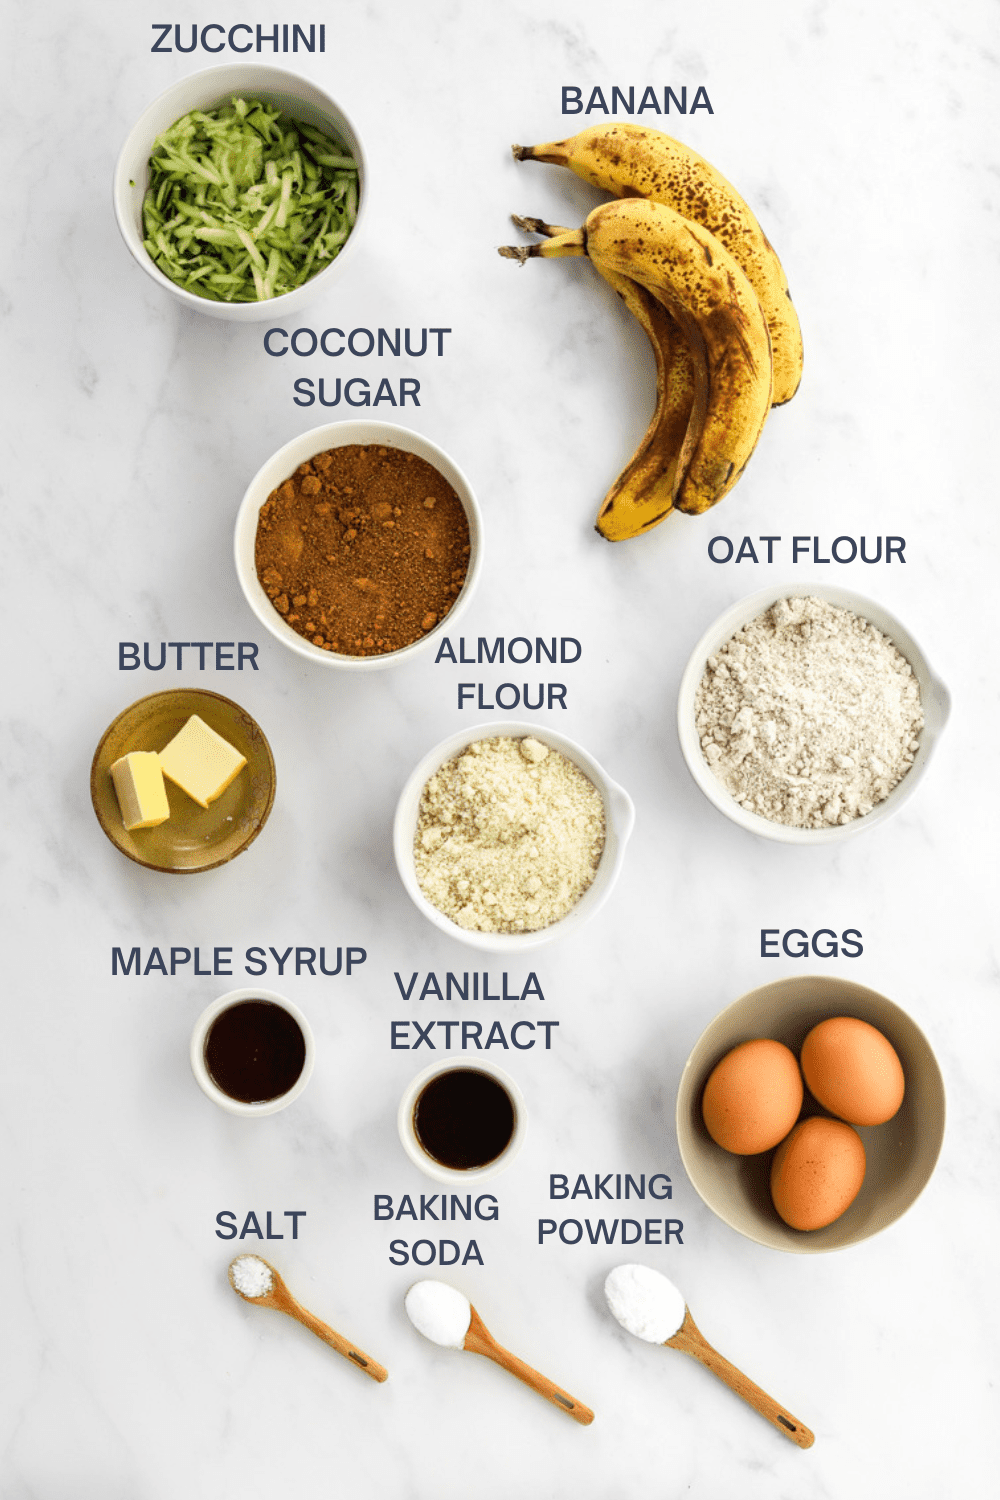 Ingredients for banana bread with zucchini in it with labels over each ingredient. 